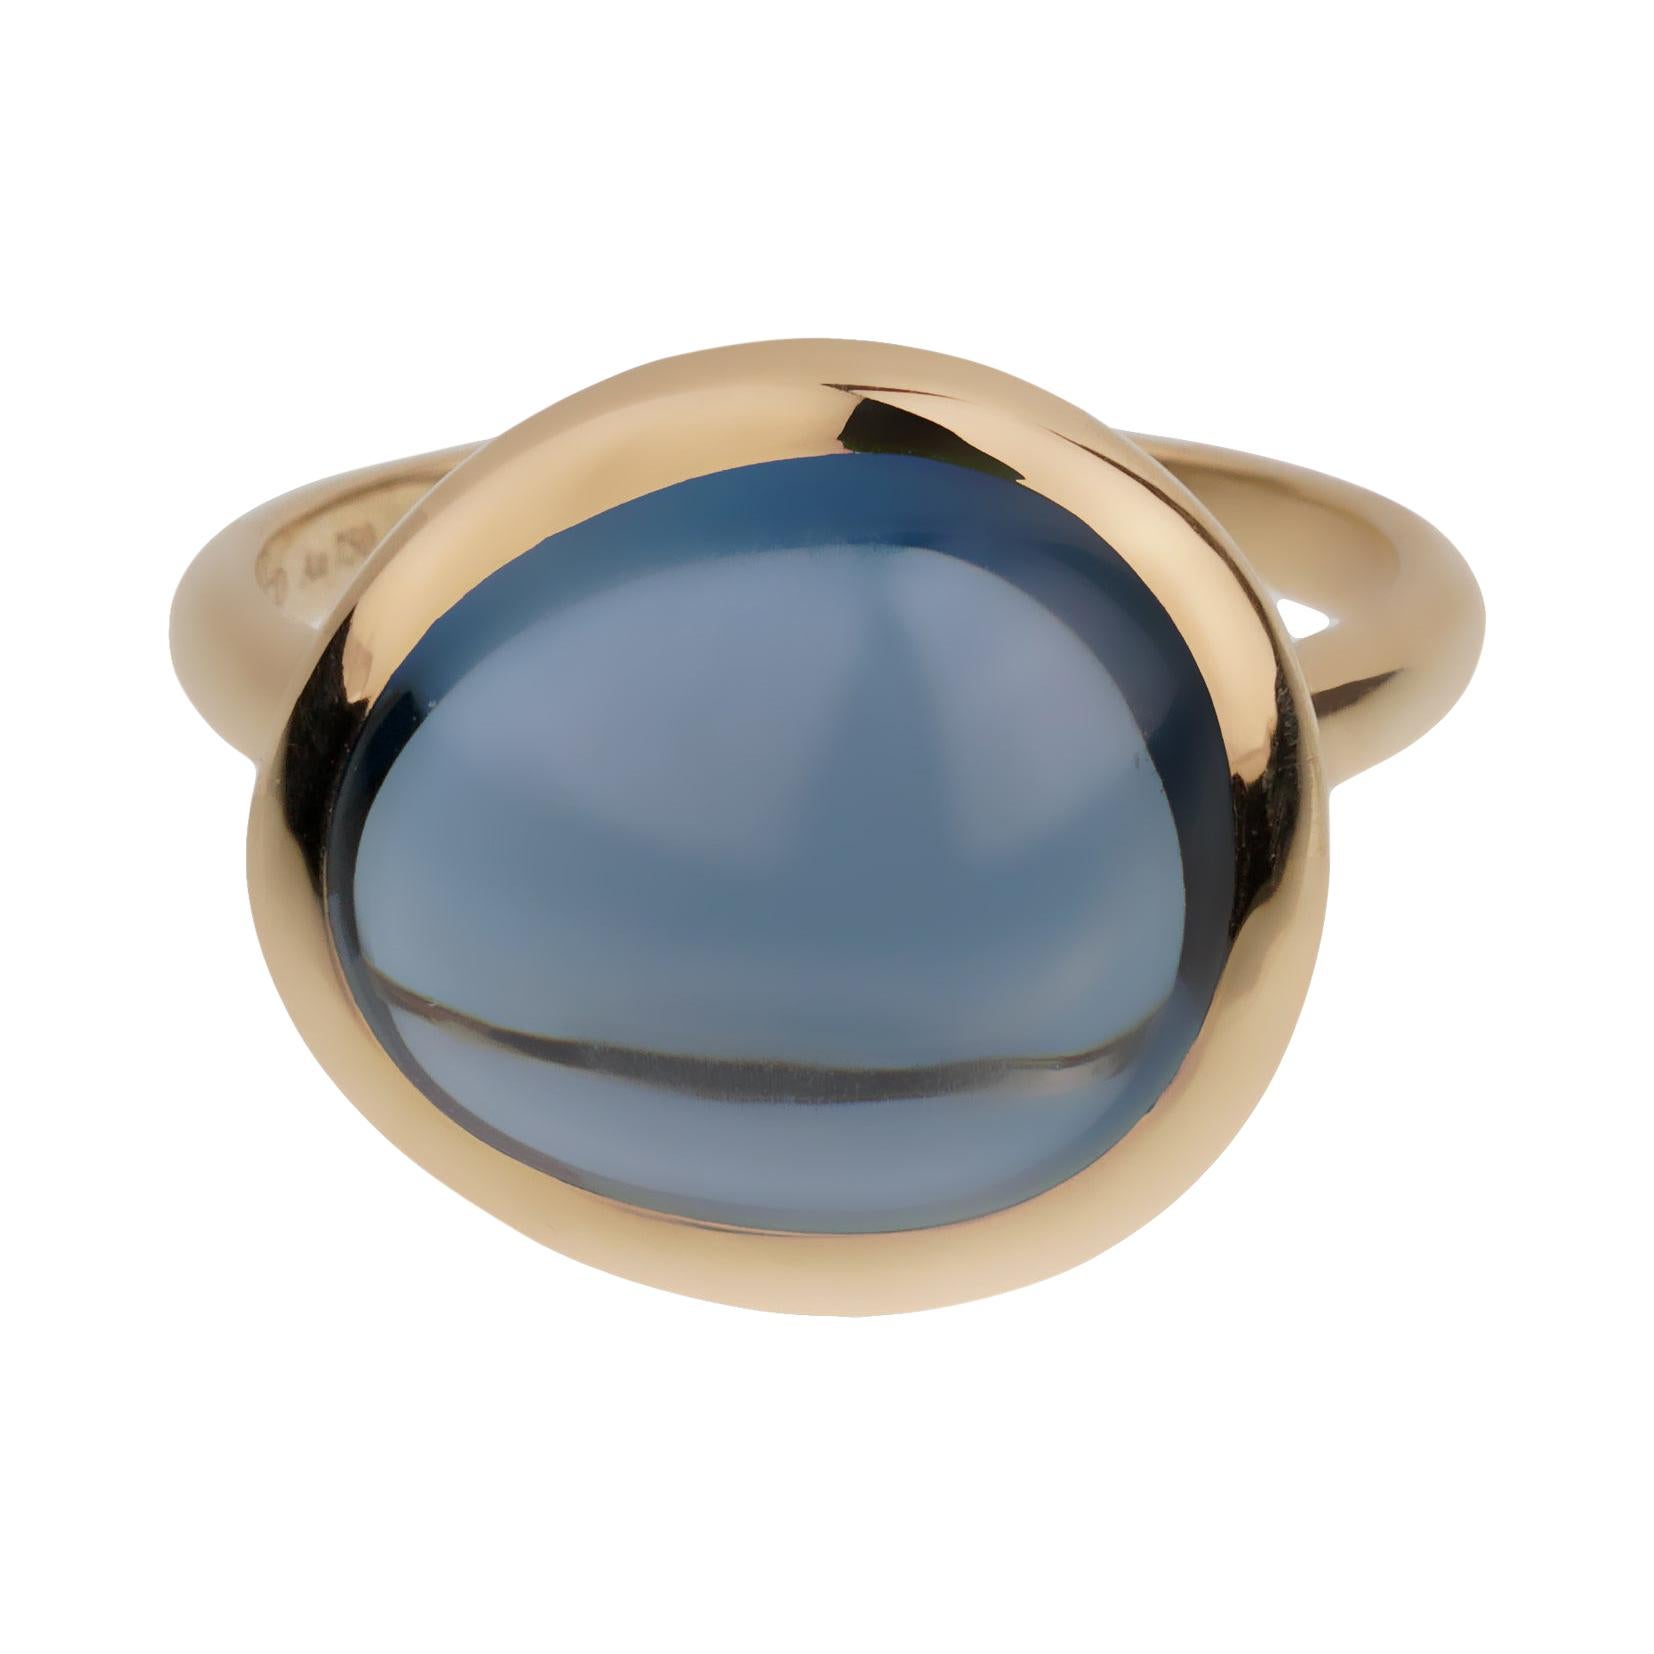 A chic Fred of Paris cocktail ring showcasing a 7ct London Topaz wrapped in 18k yellow gold. The ring measures a size 5 3/4 and can be resized if needed.